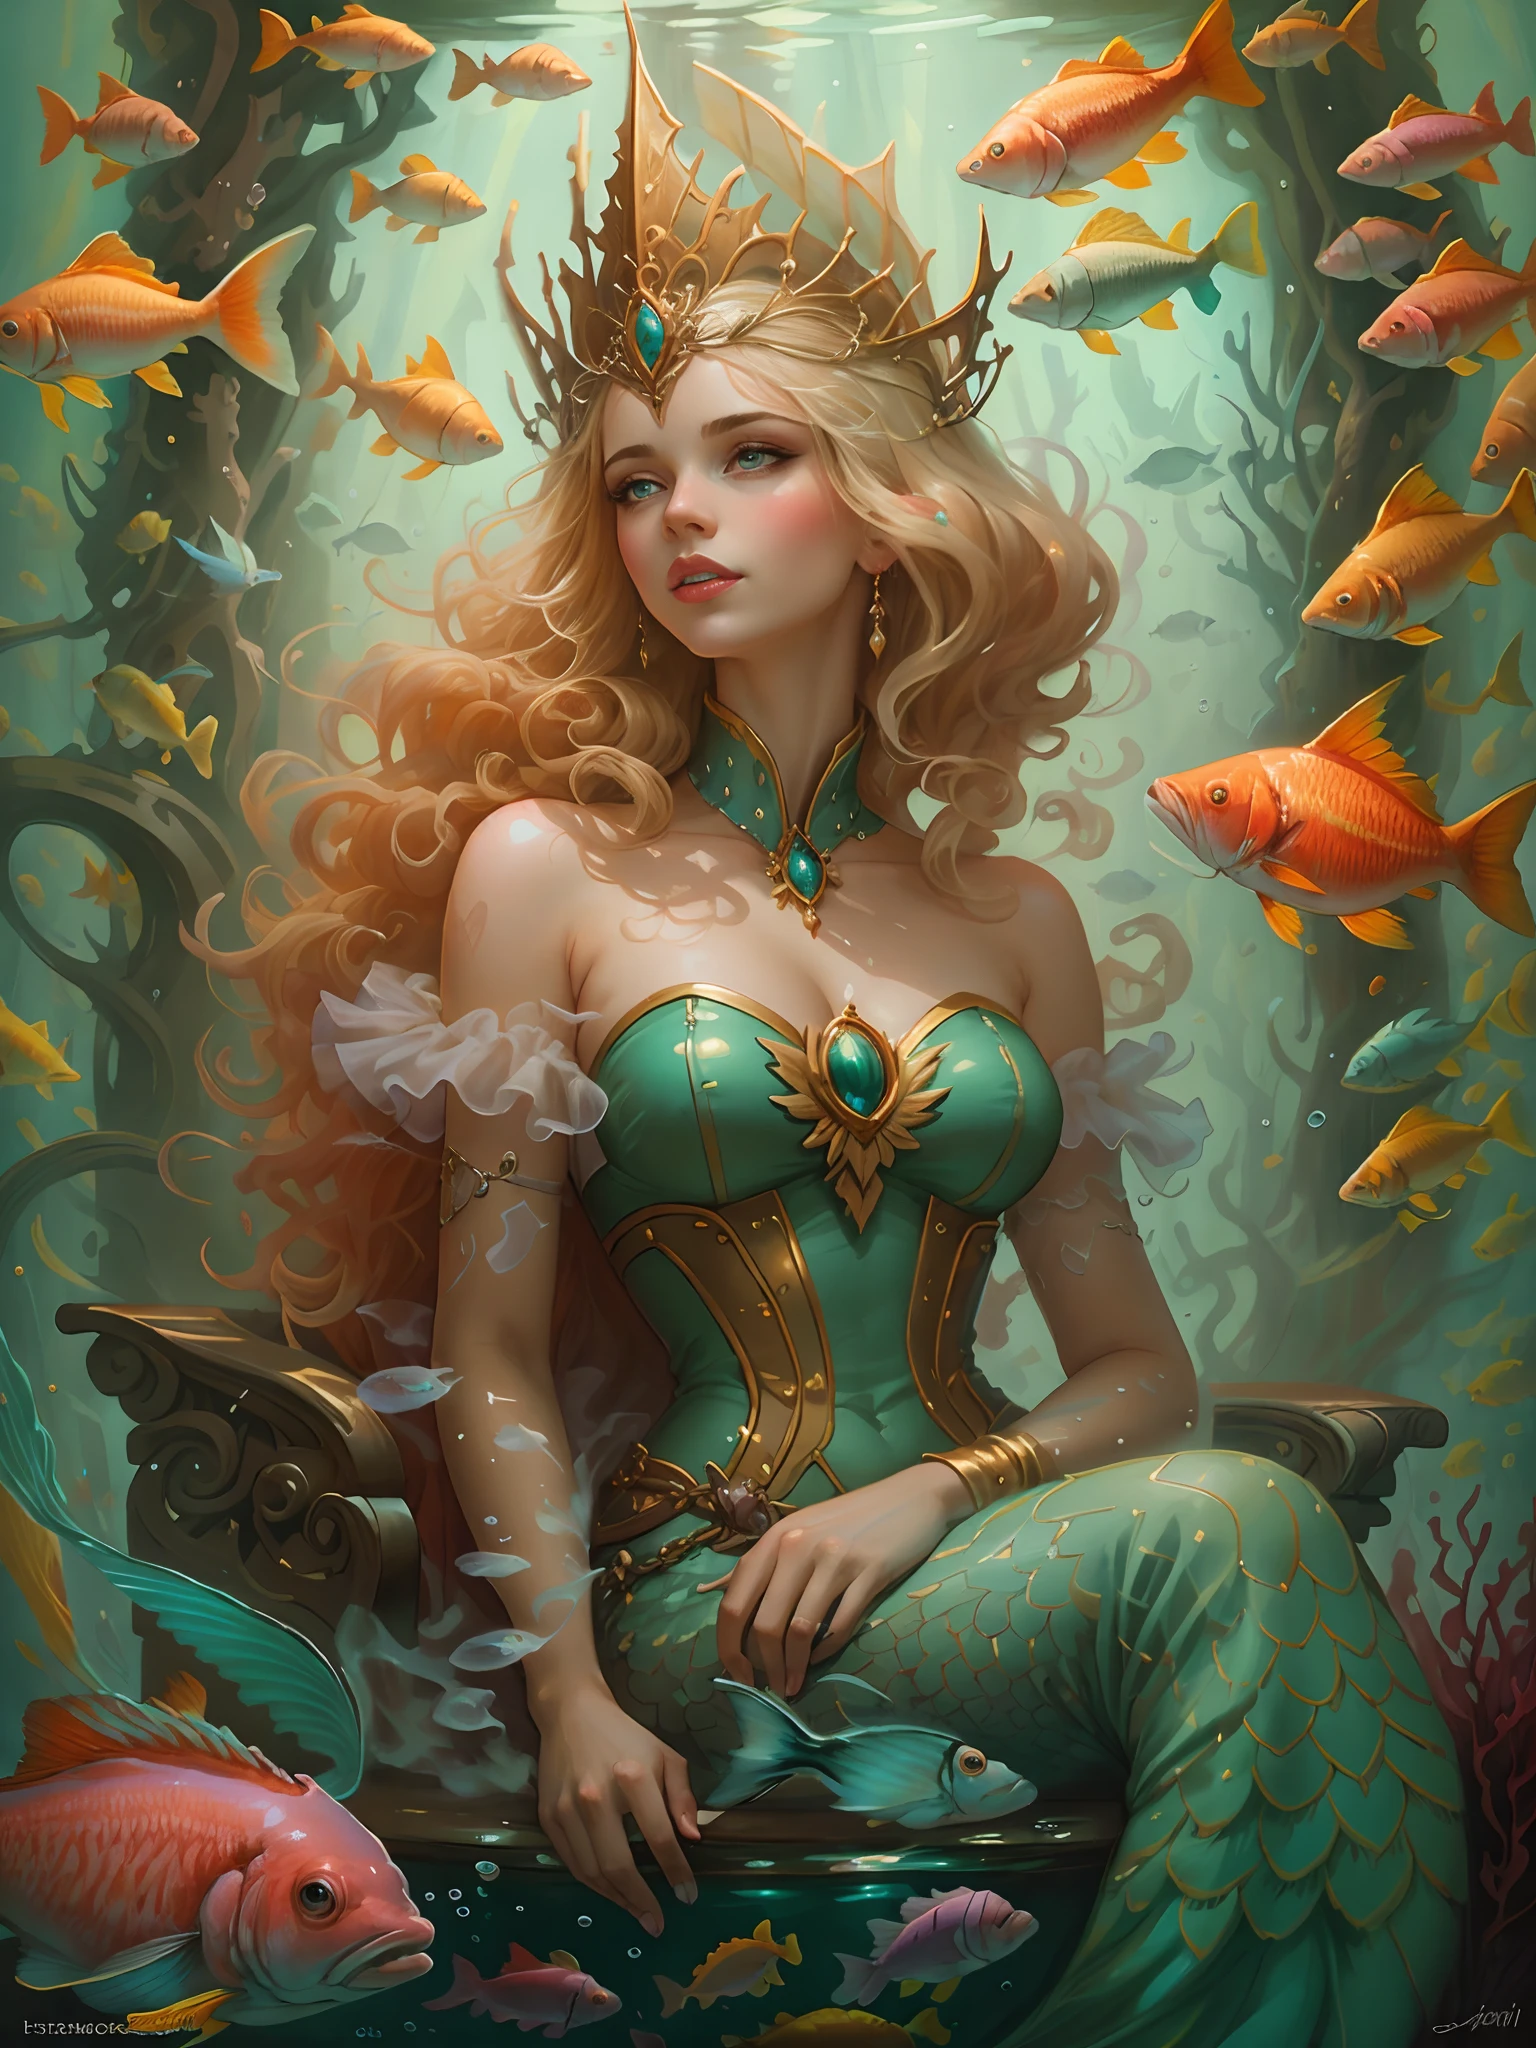 A woman sits on the throne of the palace，Beutiful women，Golden hair，（Beautiful bright eyes），Surrounded by fish and mirrors, Lots of fish，fish flocks，the reef，airbubble，sitting in his throne underwater, dan mumford tom bagshaw, jen bartel, portrait of mermaid queen, Fantasy art Behance, mohrbacher, Fantasy art style, Detailed fantasy illustration, A beautiful artwork illustration, fantasy art illustration, style of peter mohrbacher, peter mohrbacher''